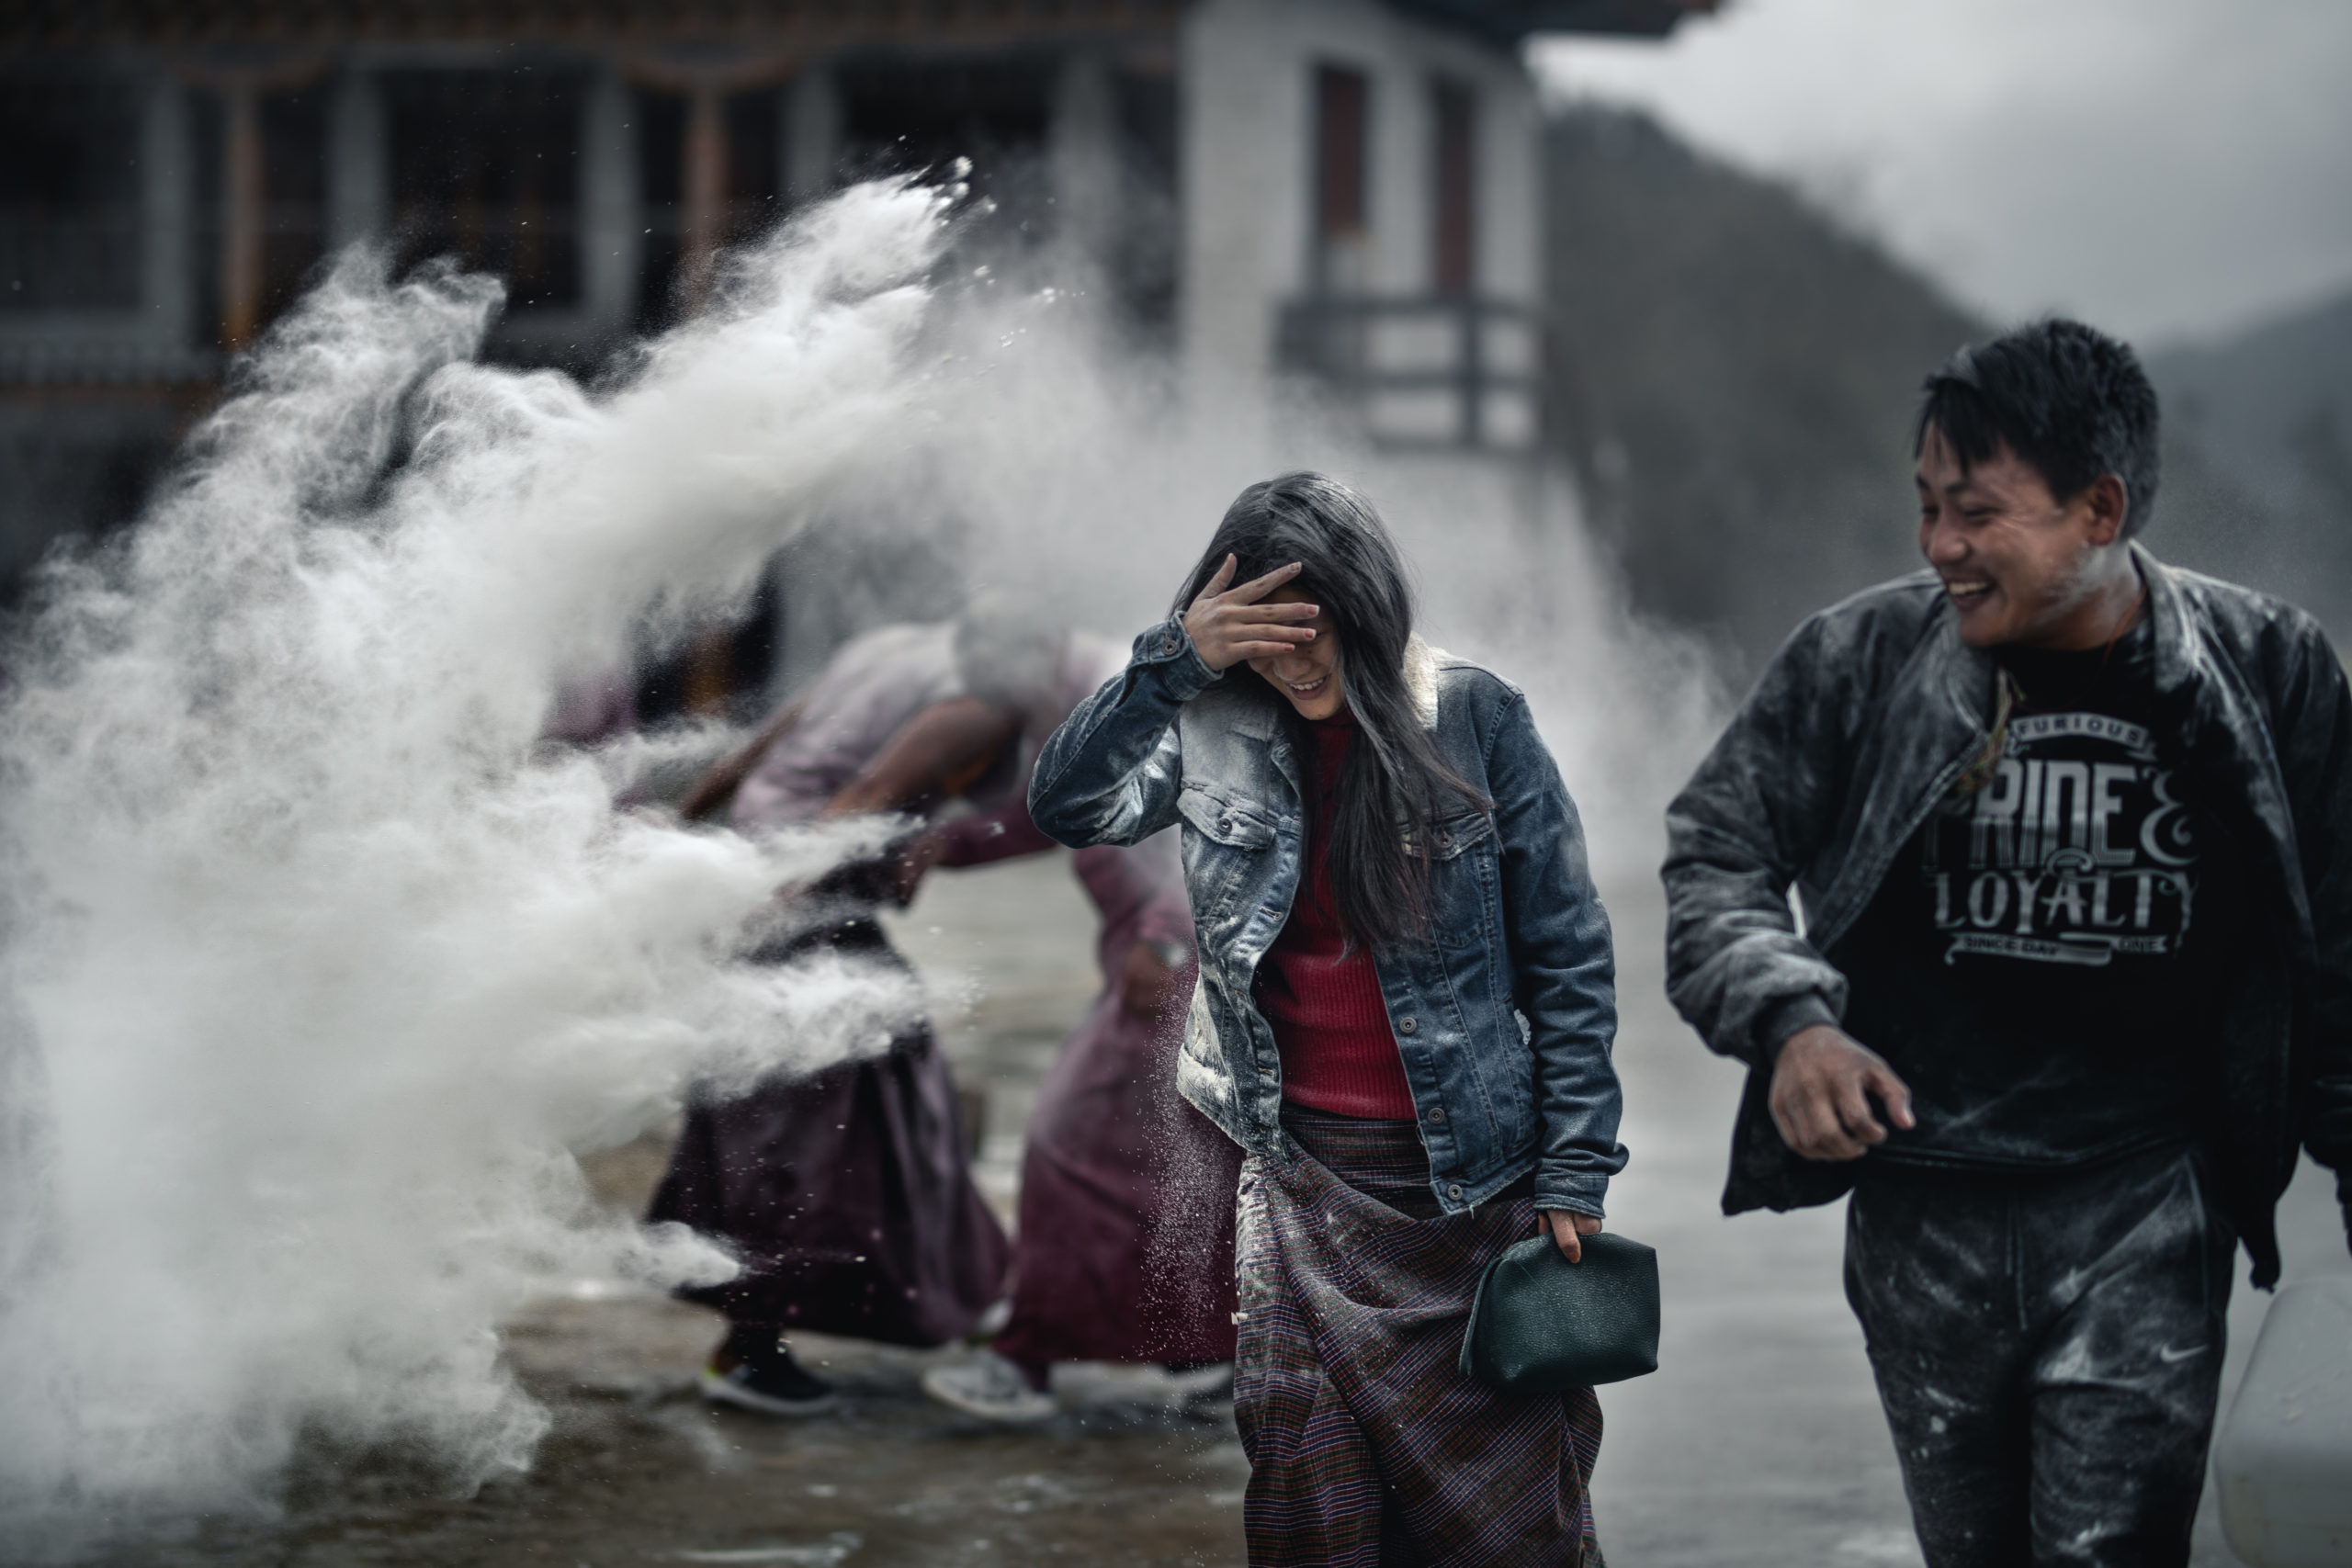 A Bhutanese woman finds herself amongst a flour battle during the Losar Celebration at a monastery in Bhutan